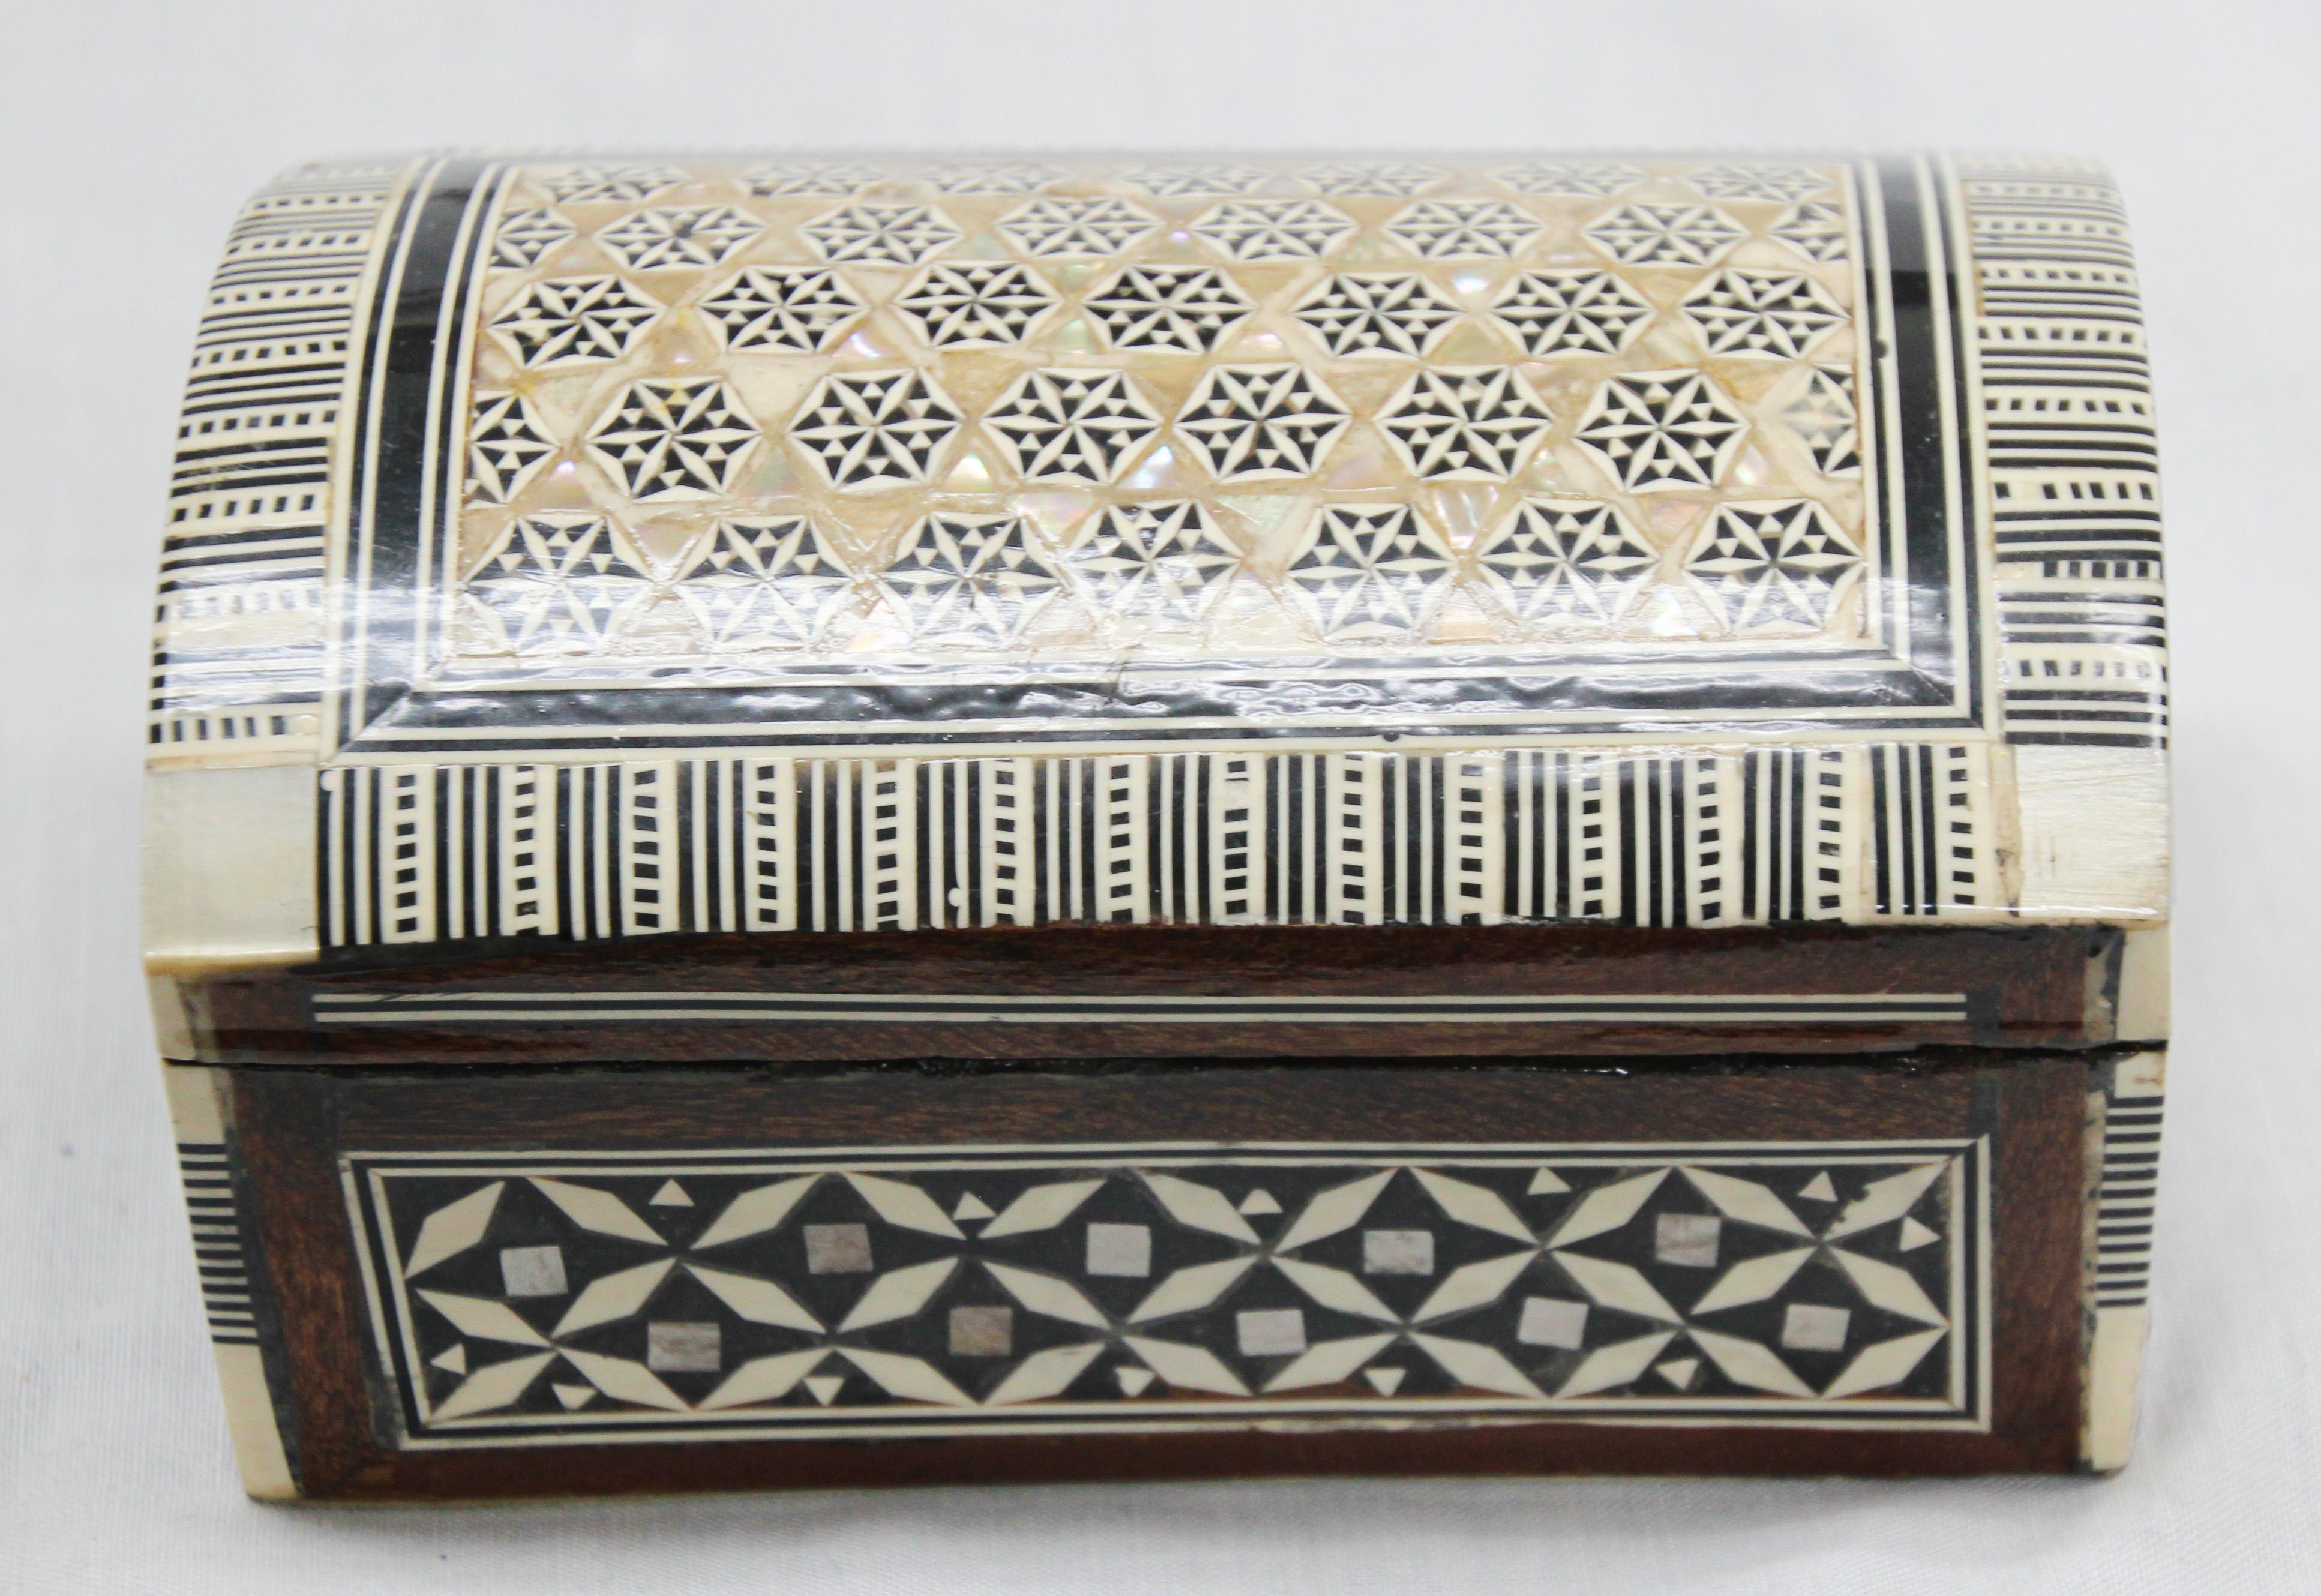 Inlay Middle Eastern Moorish Handcrafted Mosaic Decorative Box For Sale